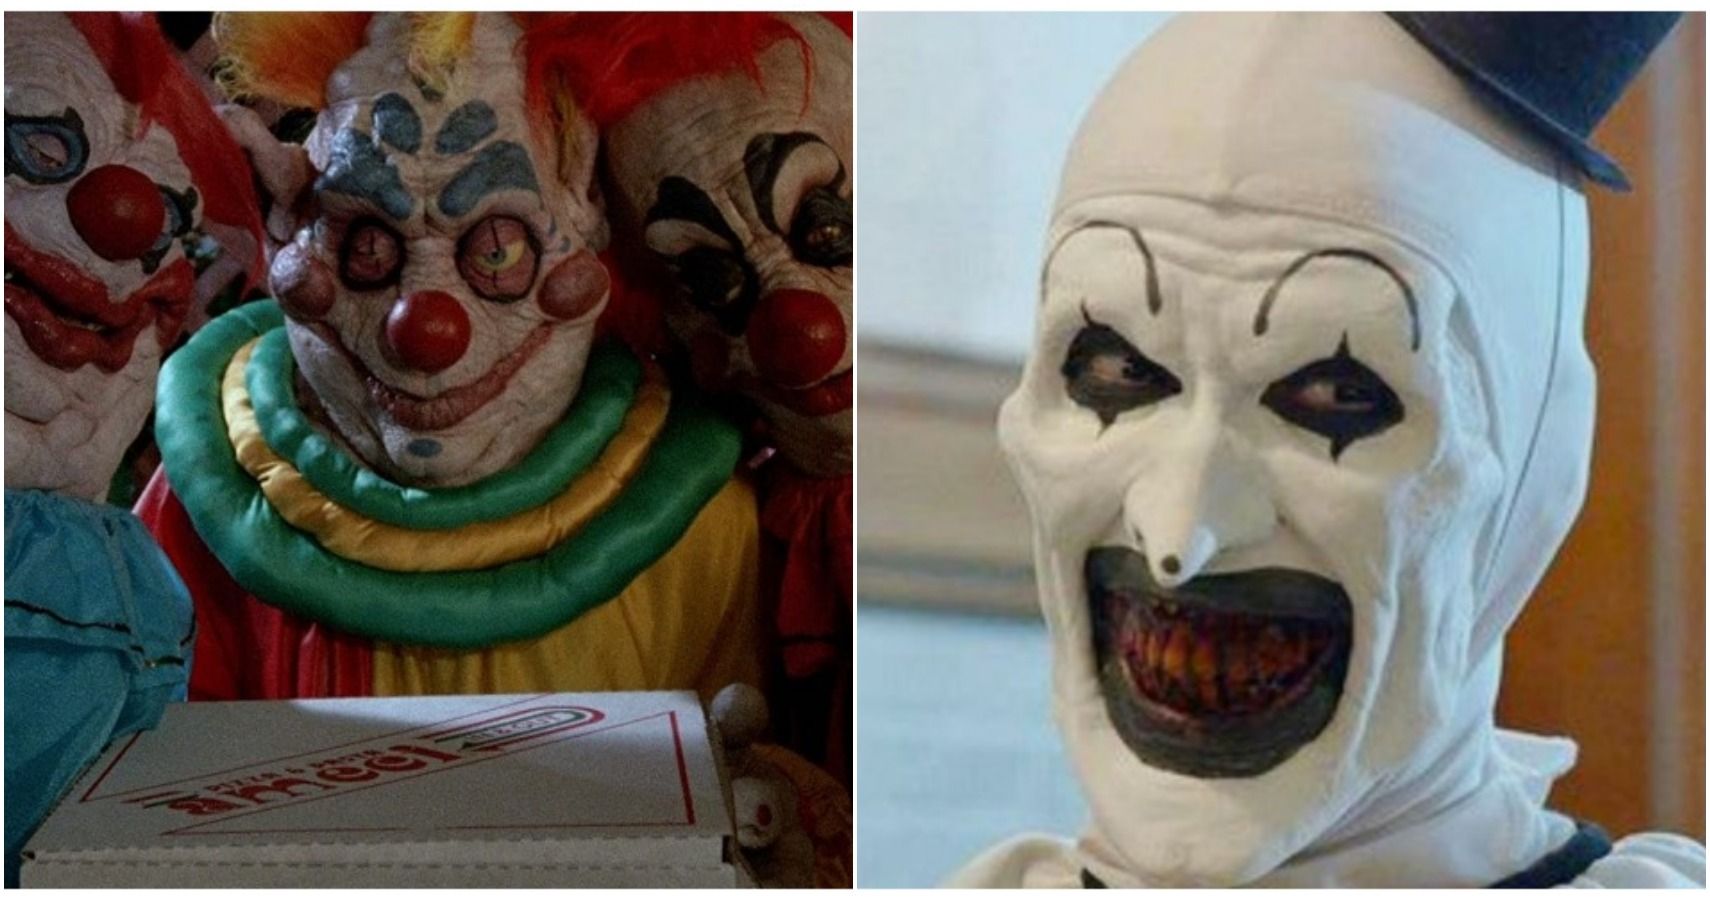 10 Most Iconic Clowns From Horror Movies, Ranked Silliest To Scariest